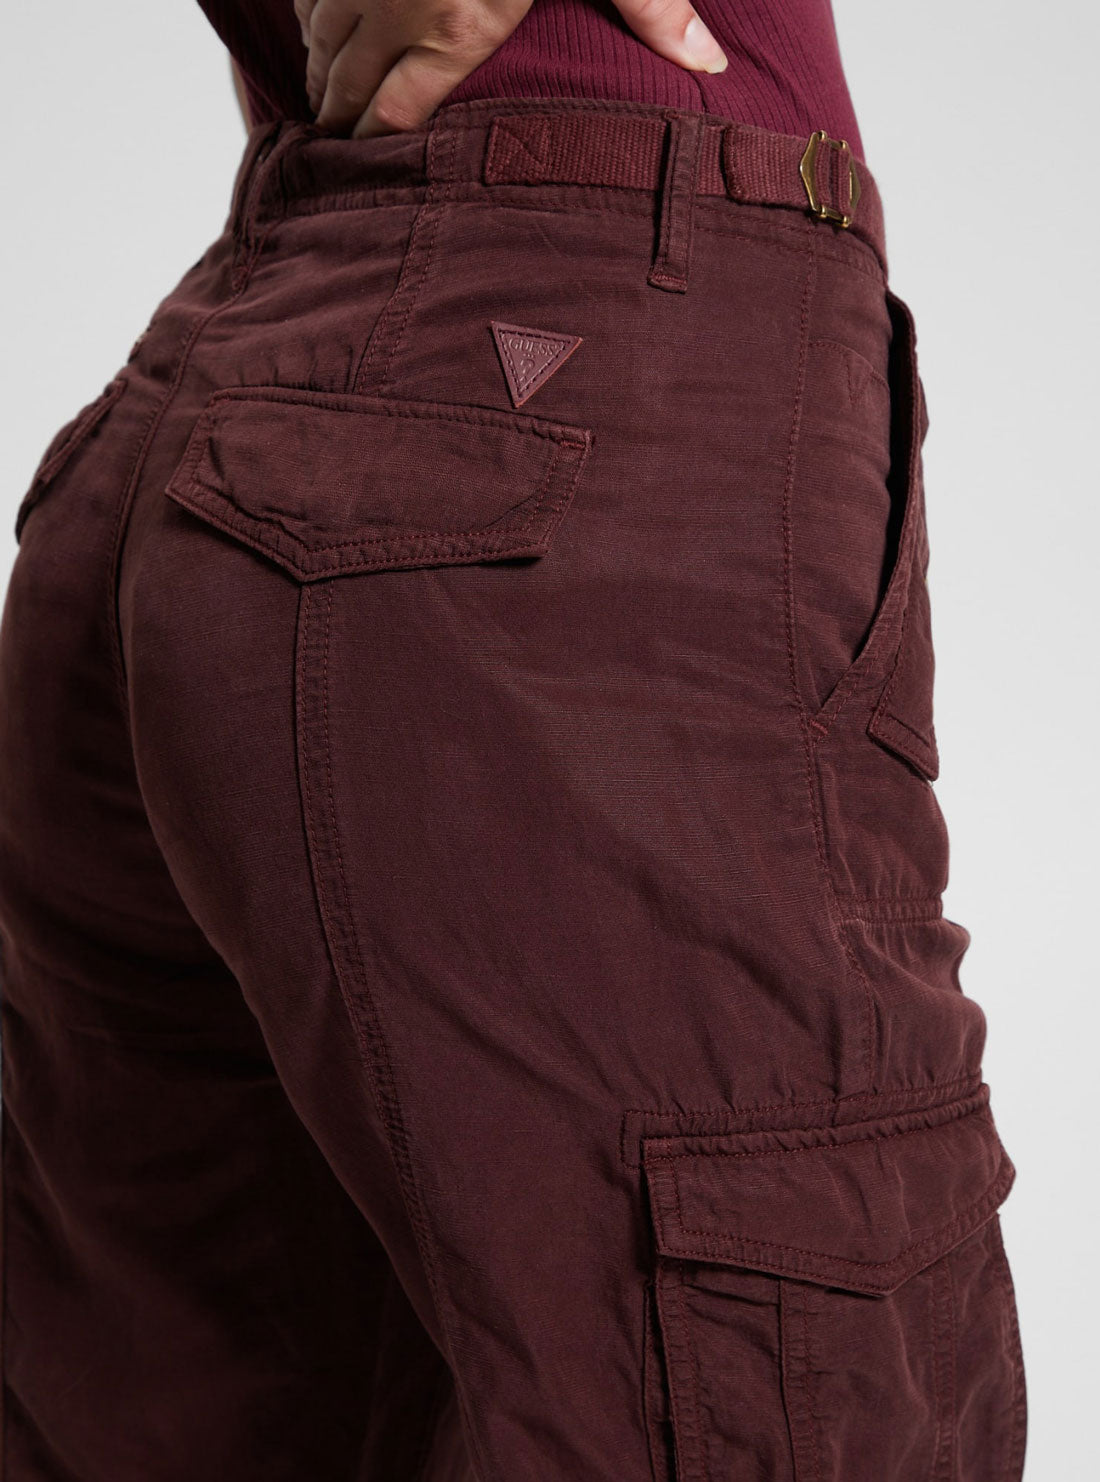 Eco Maroon Nessi Cargo Pants | GUESS Women's Apparel | detail view